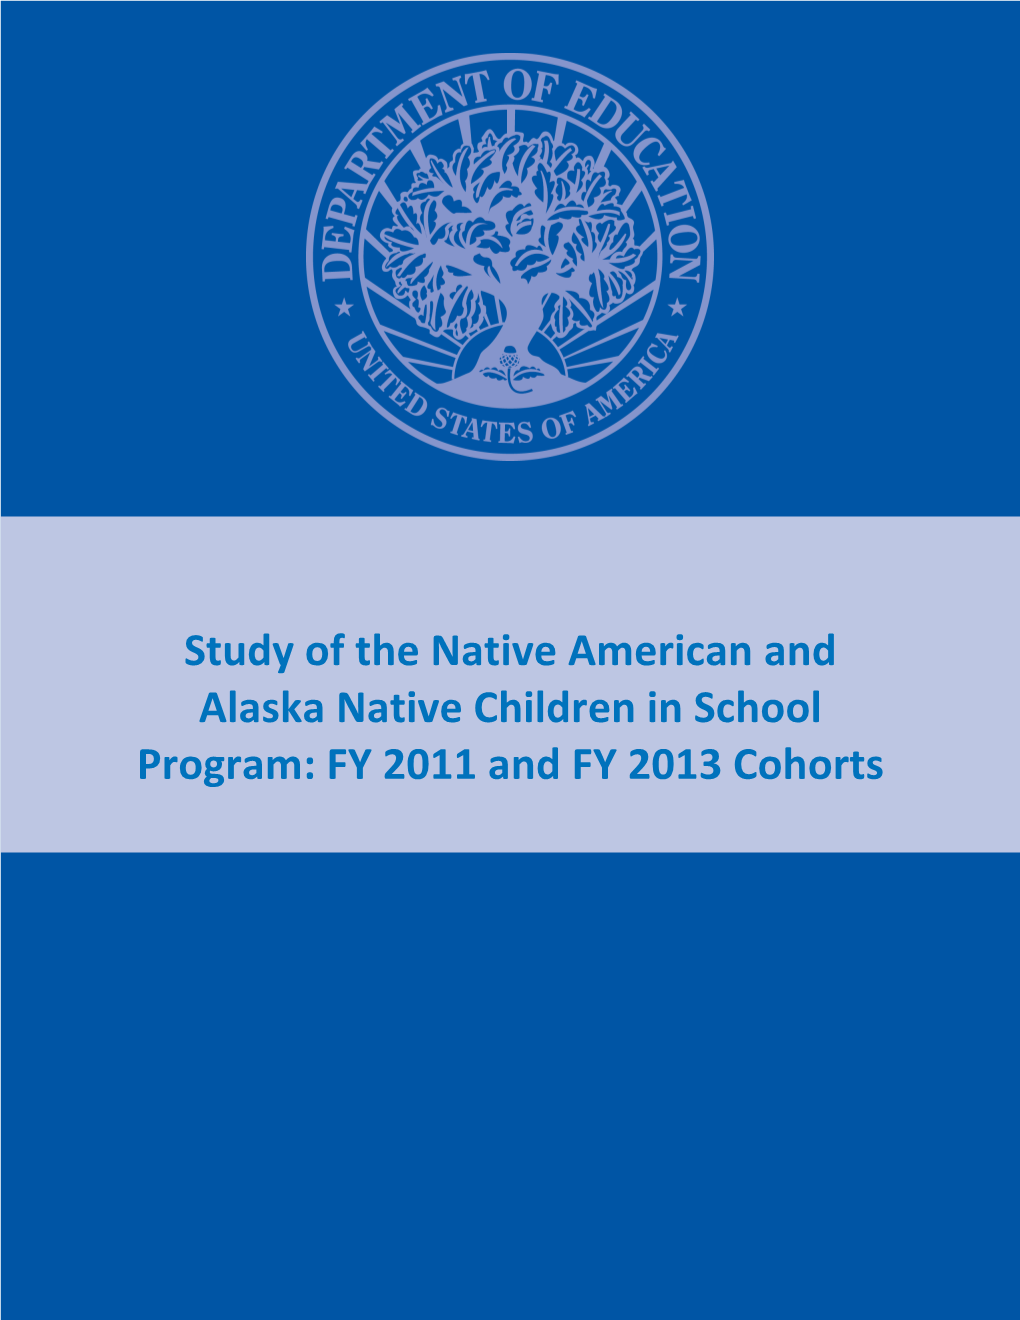 A Study of the Native American and Alaska Native Children in School